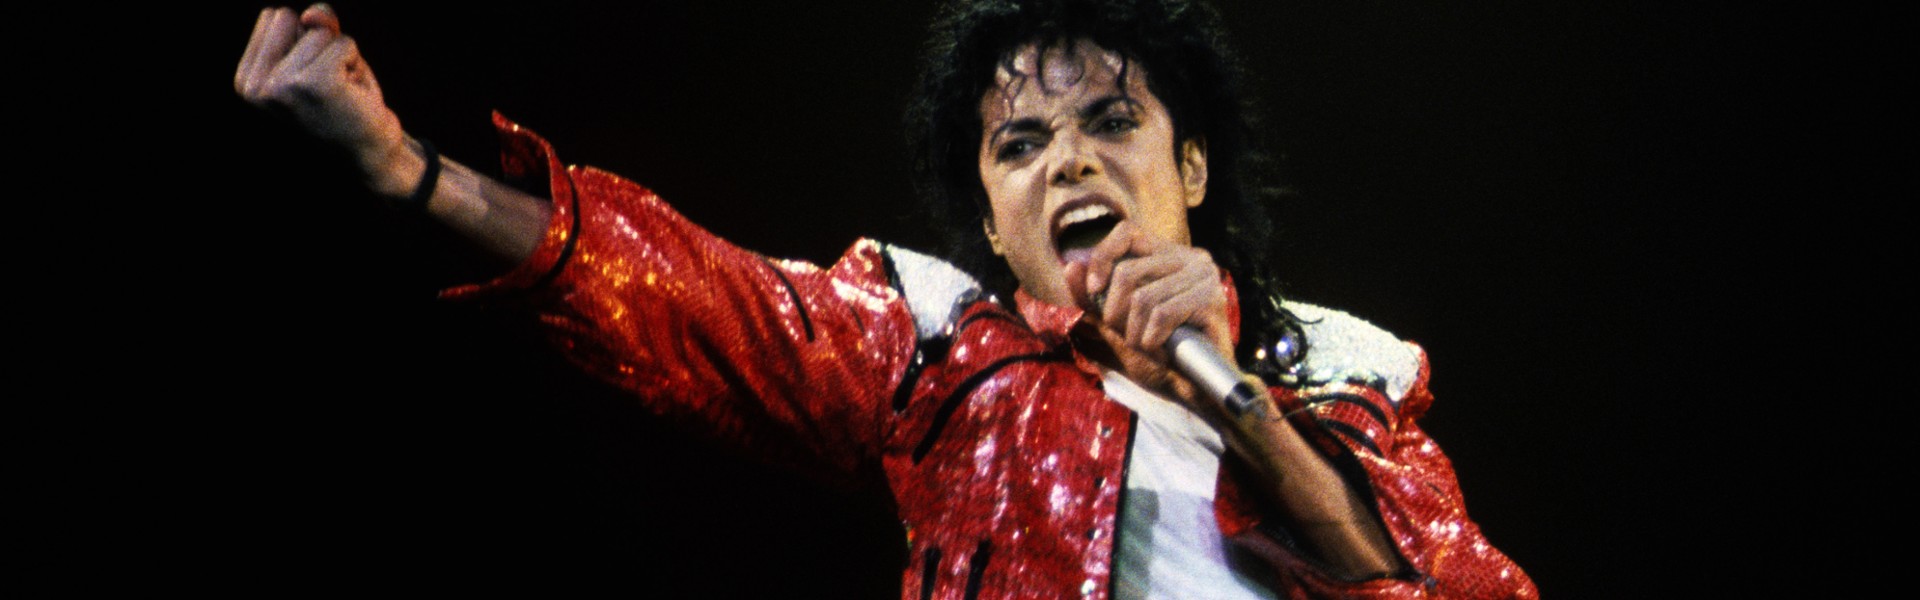 “Michael”: Michael Jackson’s film biography less controversial than anticipated